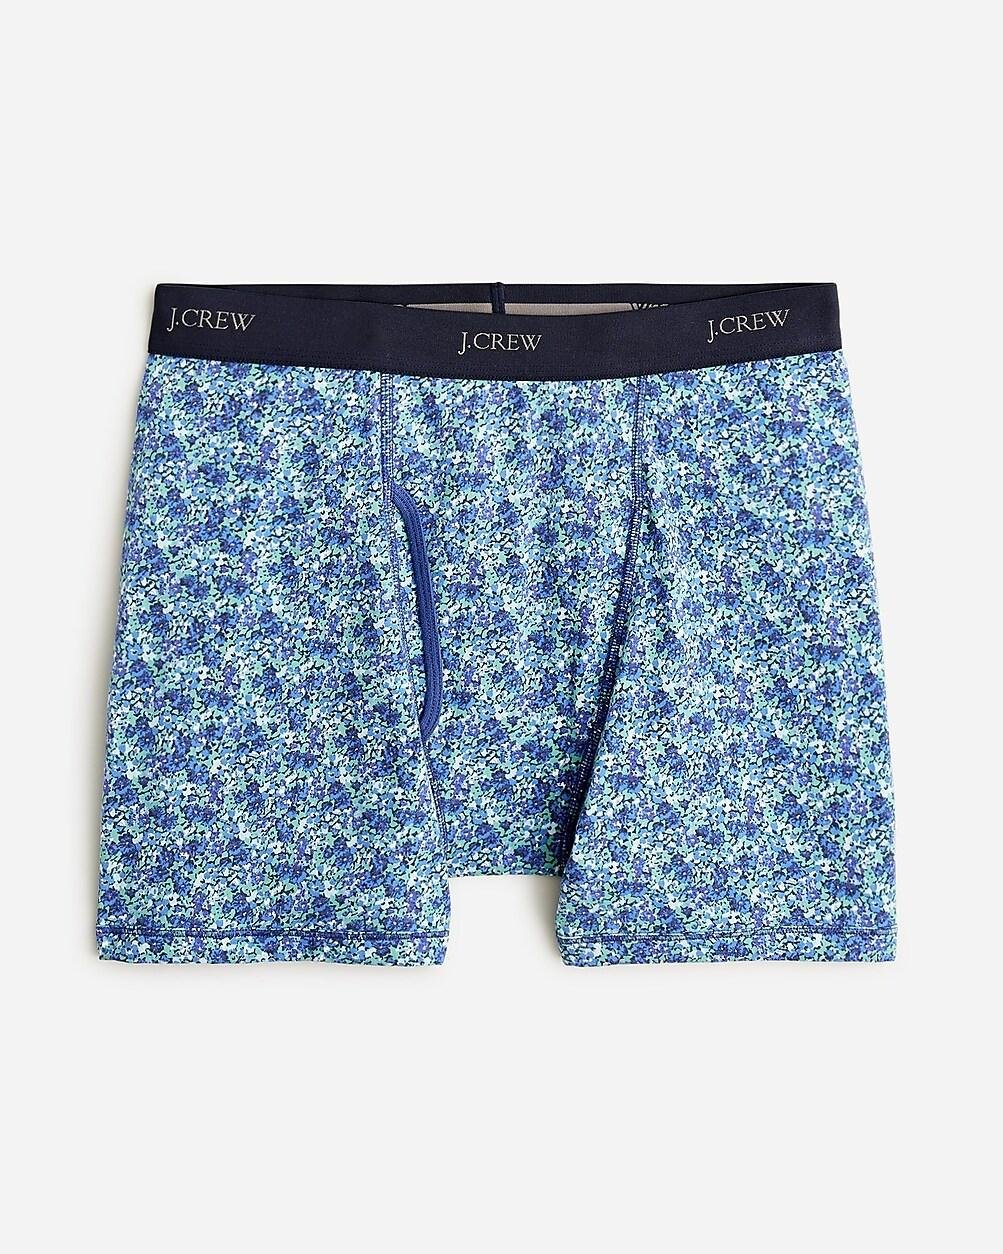 Stretch 4" boxer briefs in print by J.CREW